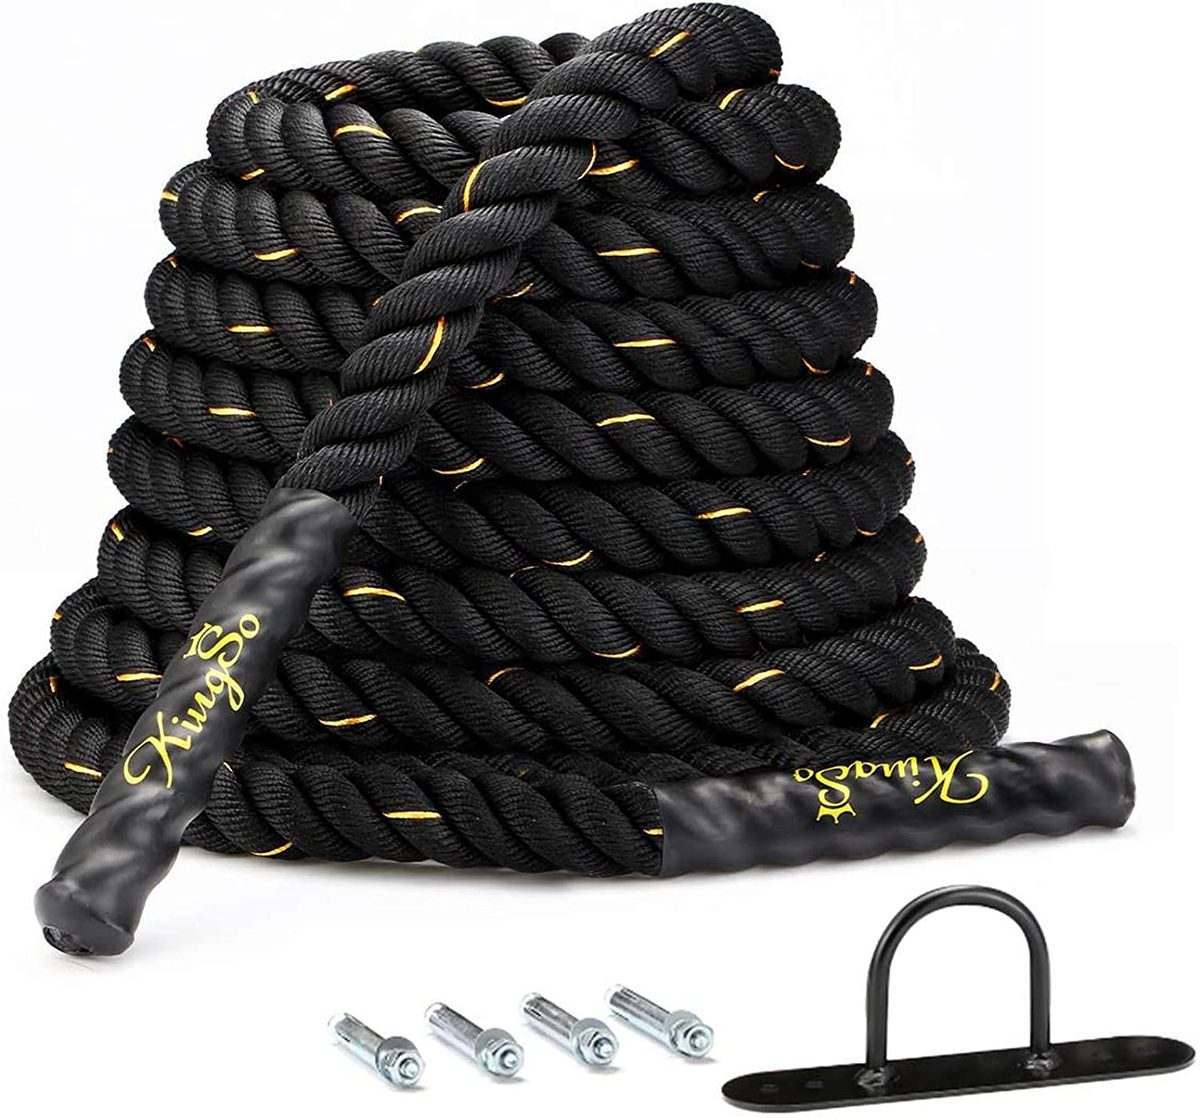 Covered Battle Rope 1.5 x 30ft, Black